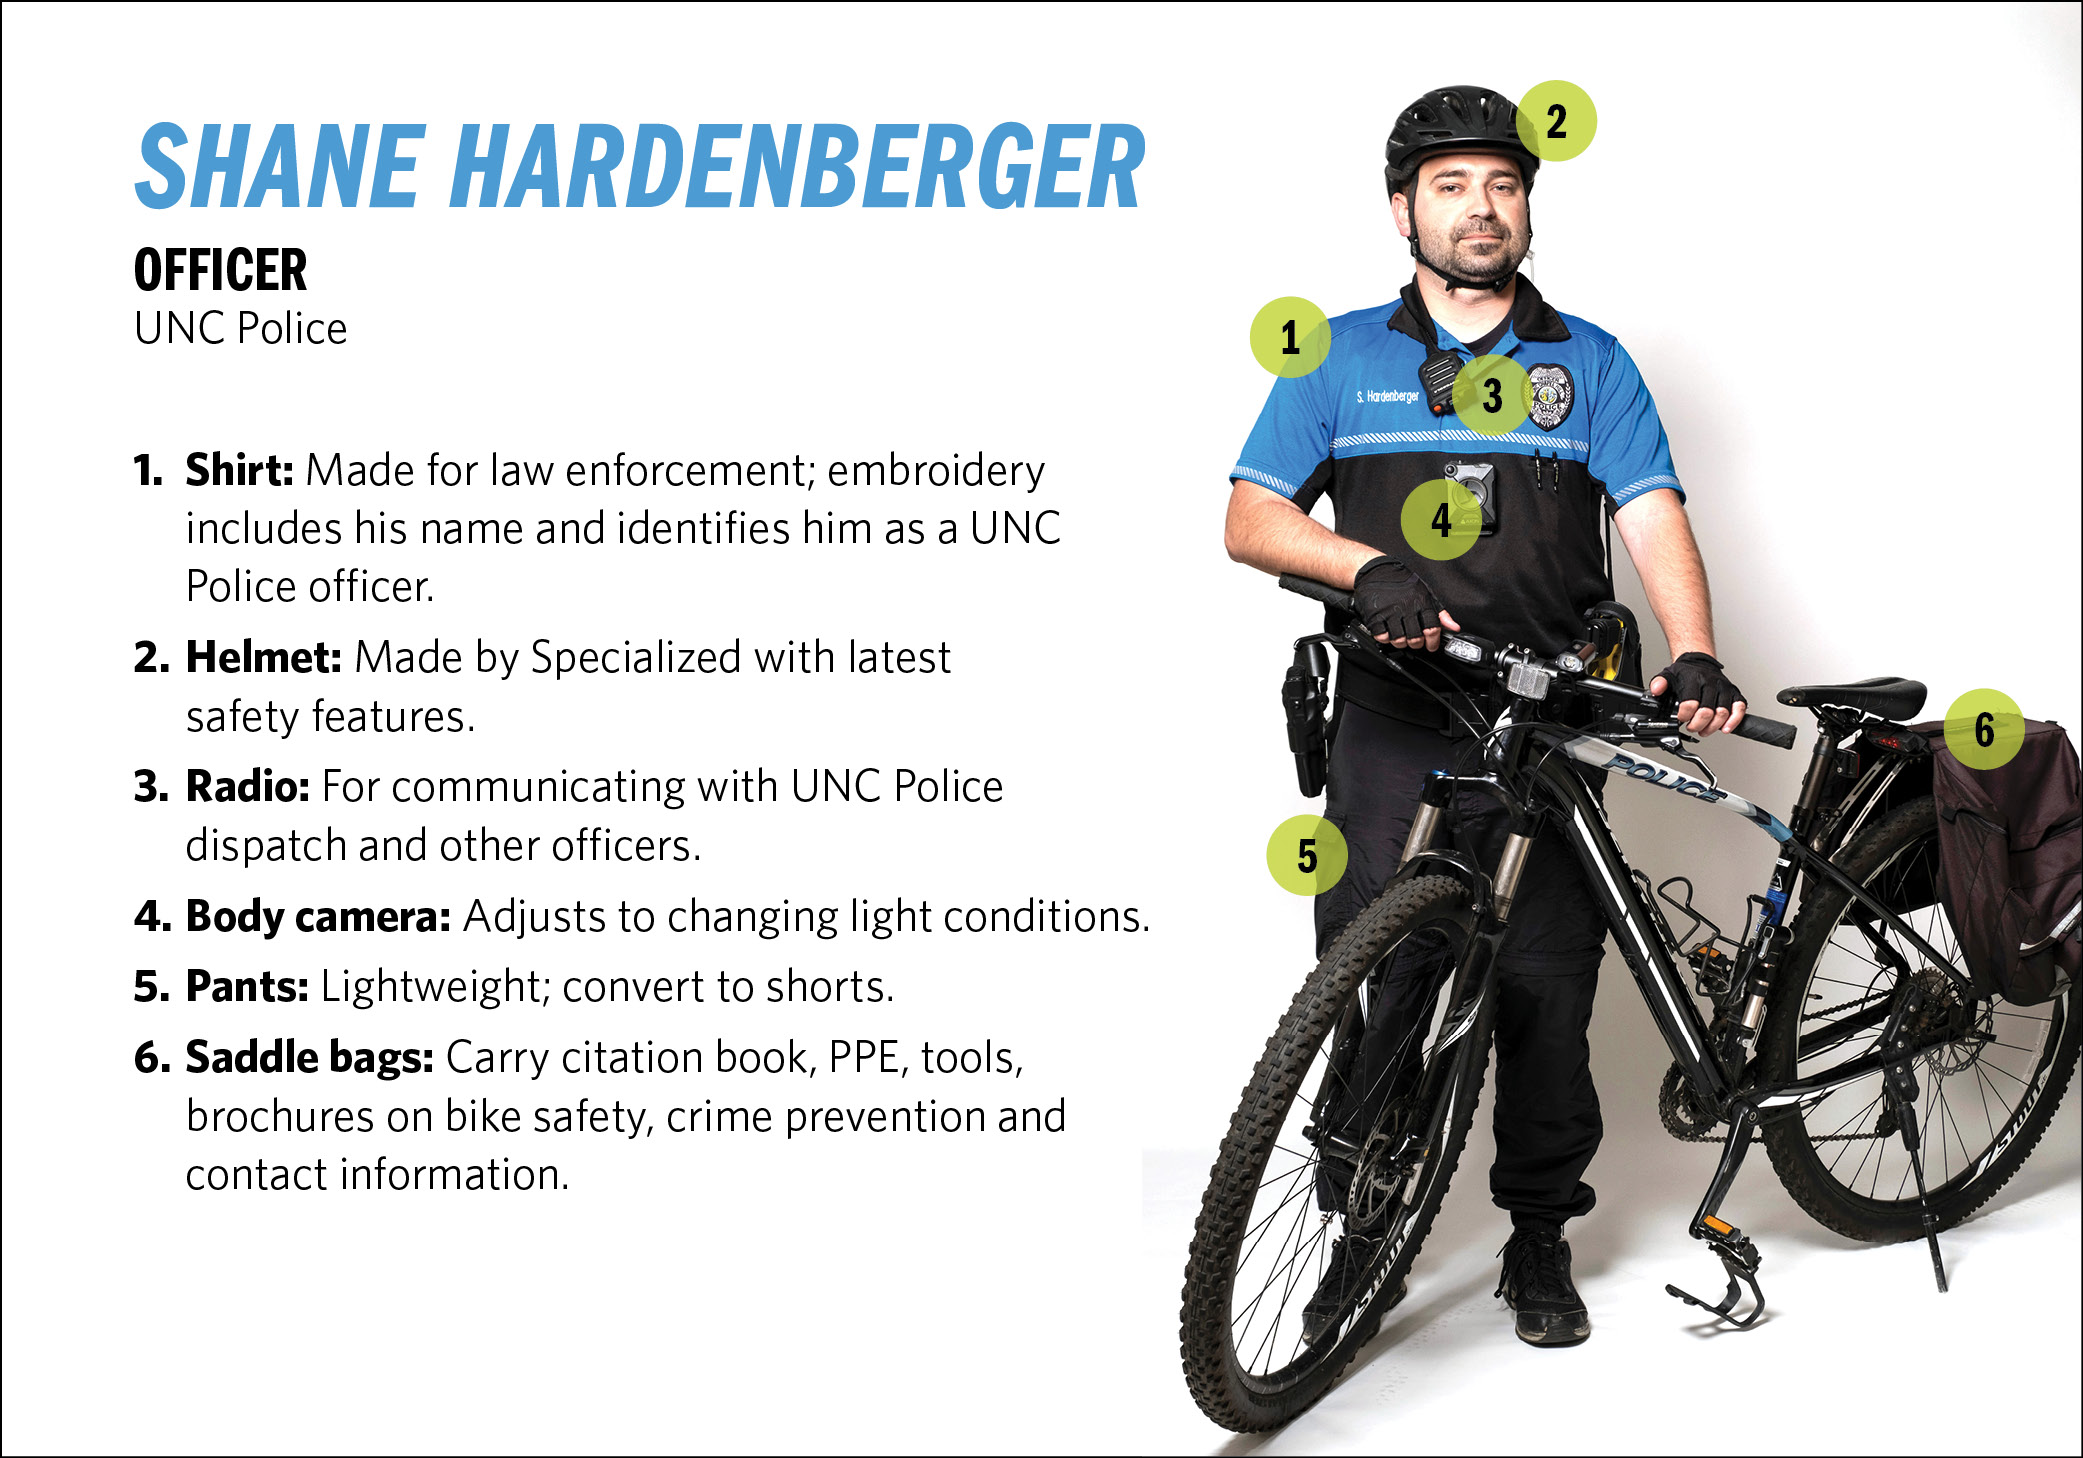 U.N.C. police officer Shane Hardenberger. Pants that convert to shorts, shirt with i.d. patch, specialized helmet, body camera around neck, radio on shoulder.